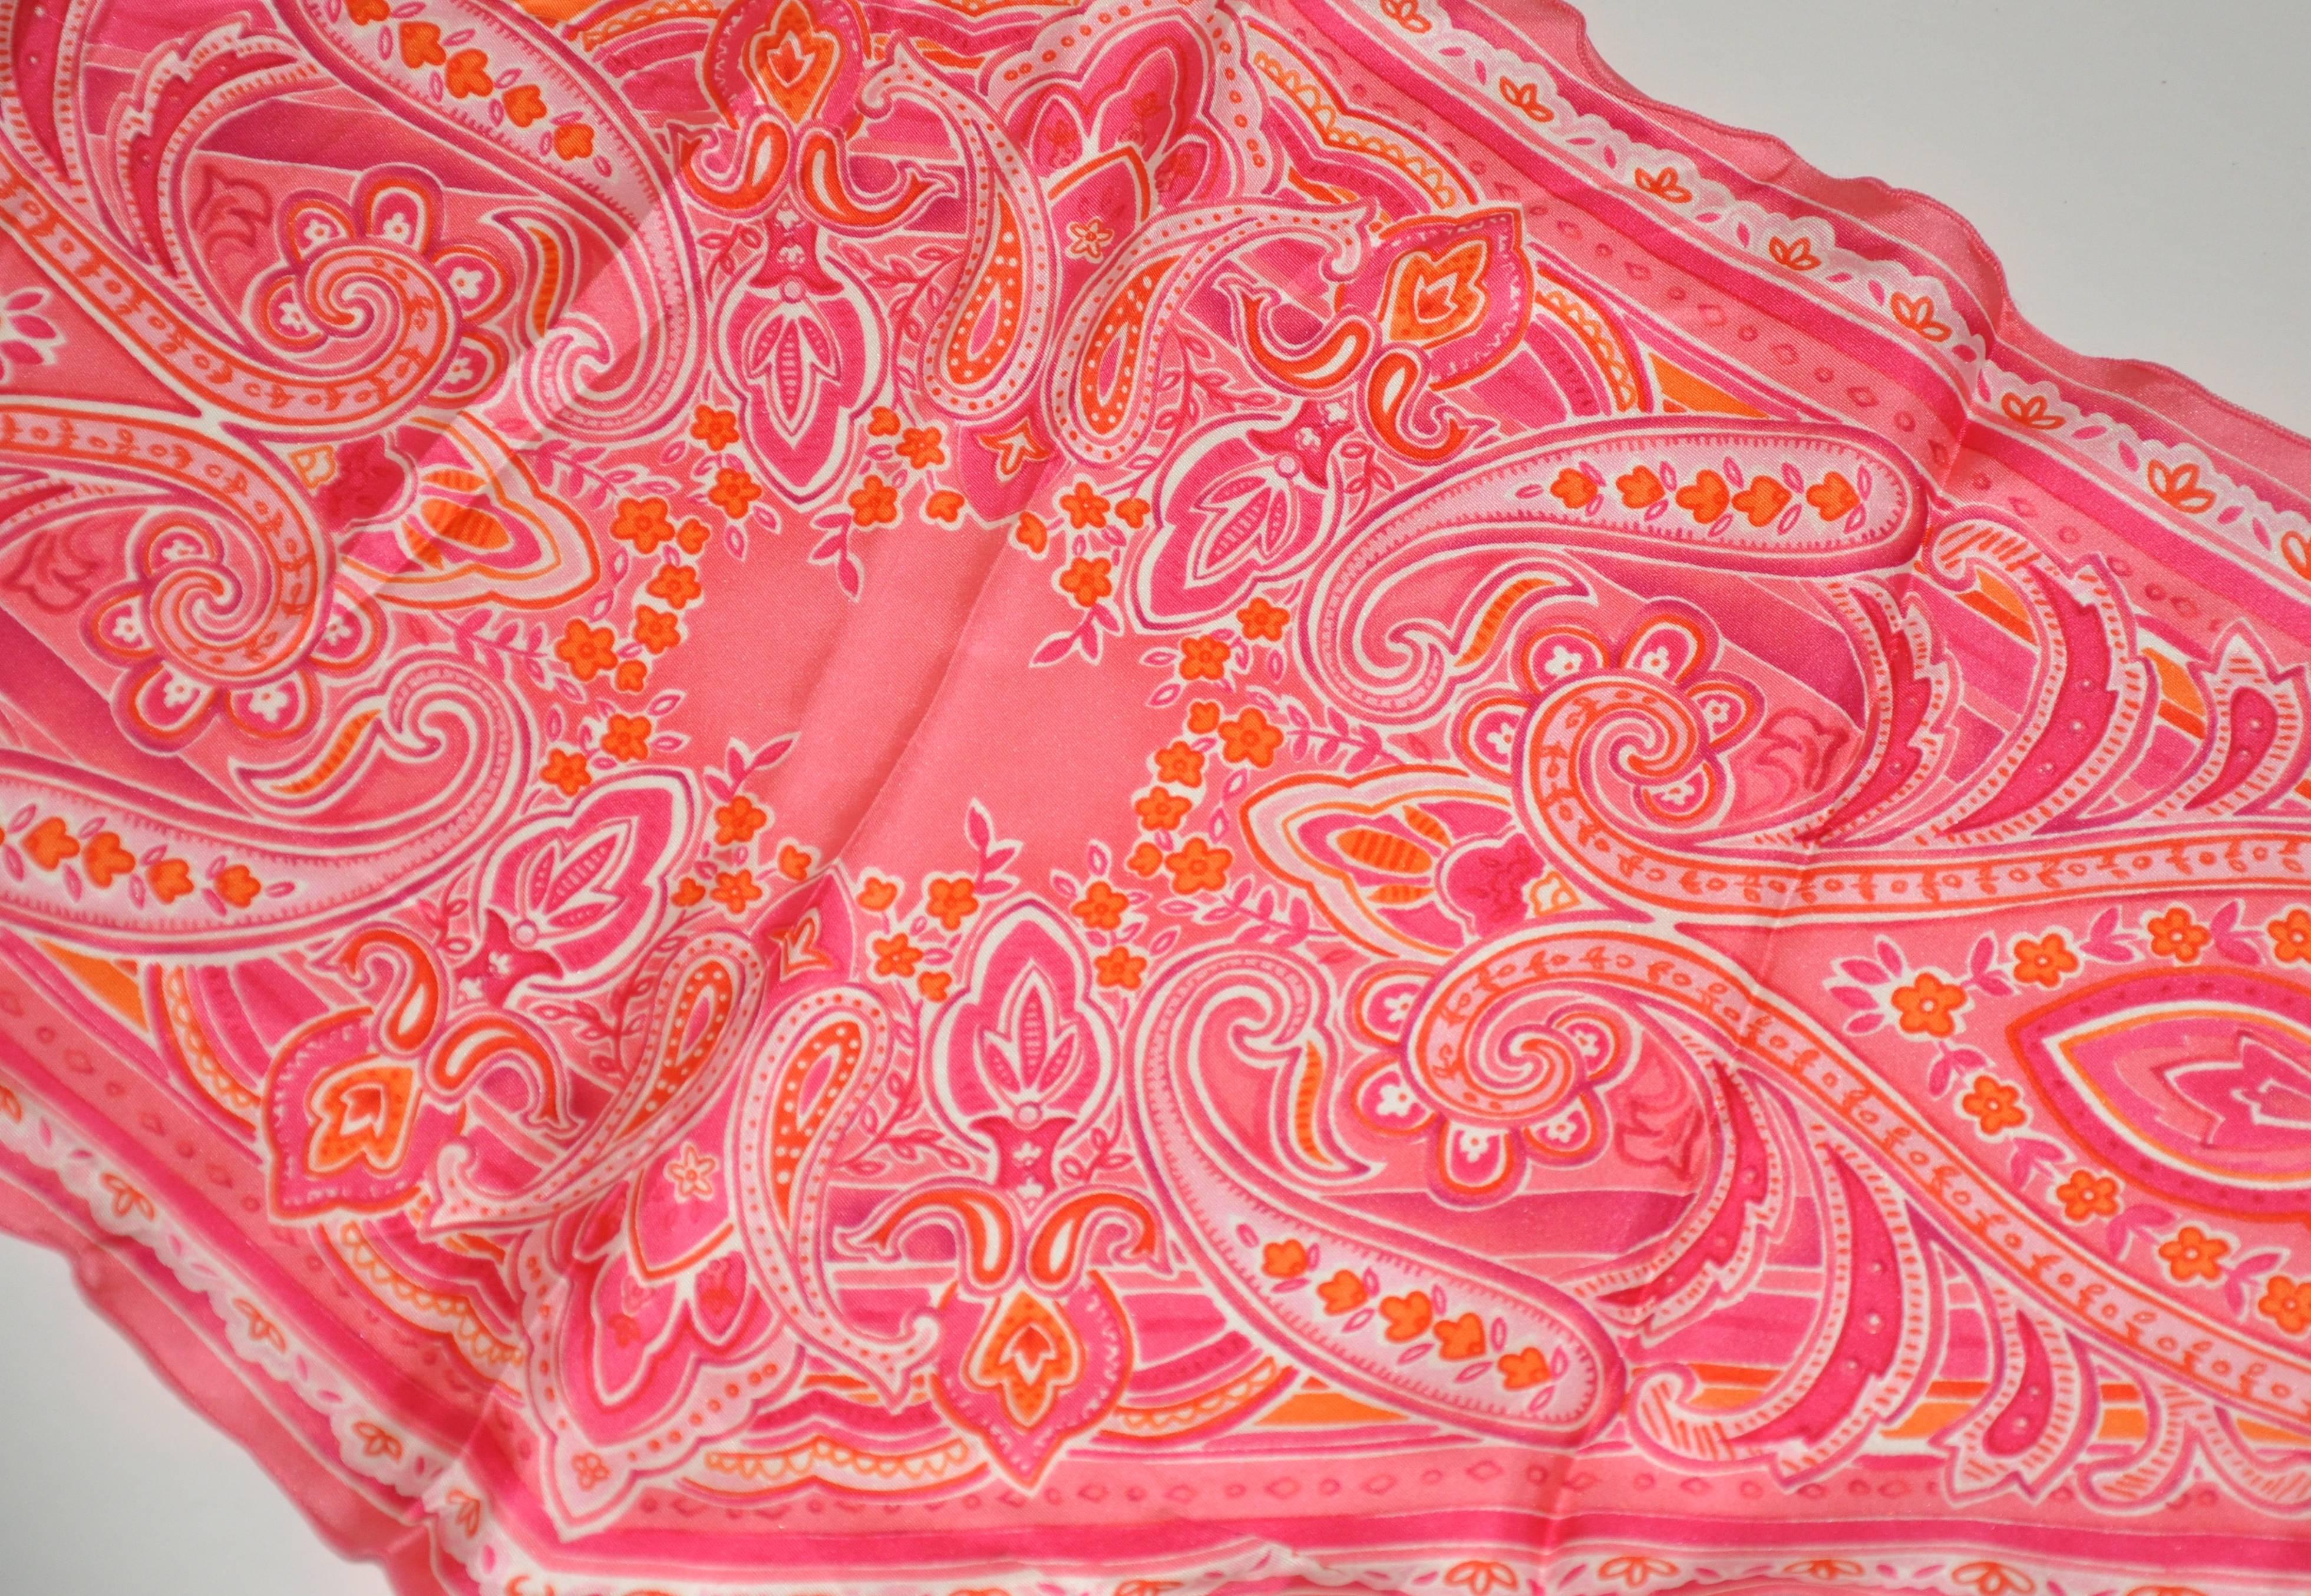 This wonderfully vivid combination of fuchsia & tangerine oblong silk scarf measures 14 1/2" x 45". Made in Italy.